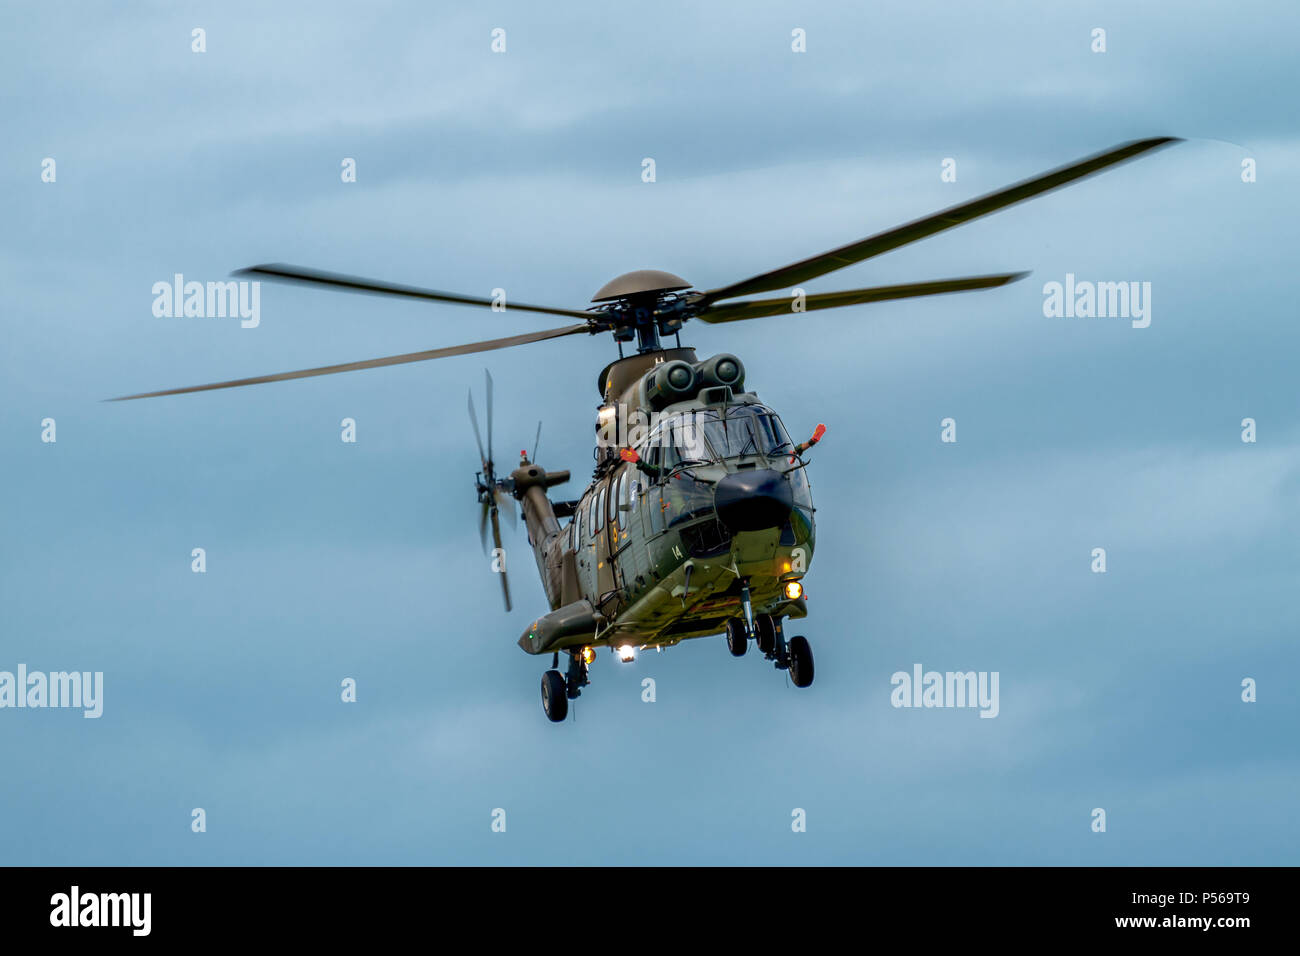 Aerospatiale Eurocopter AS 332 Super Puma helicopter of the Swiss Air Force  during aerobatic display Stock Photo - Alamy